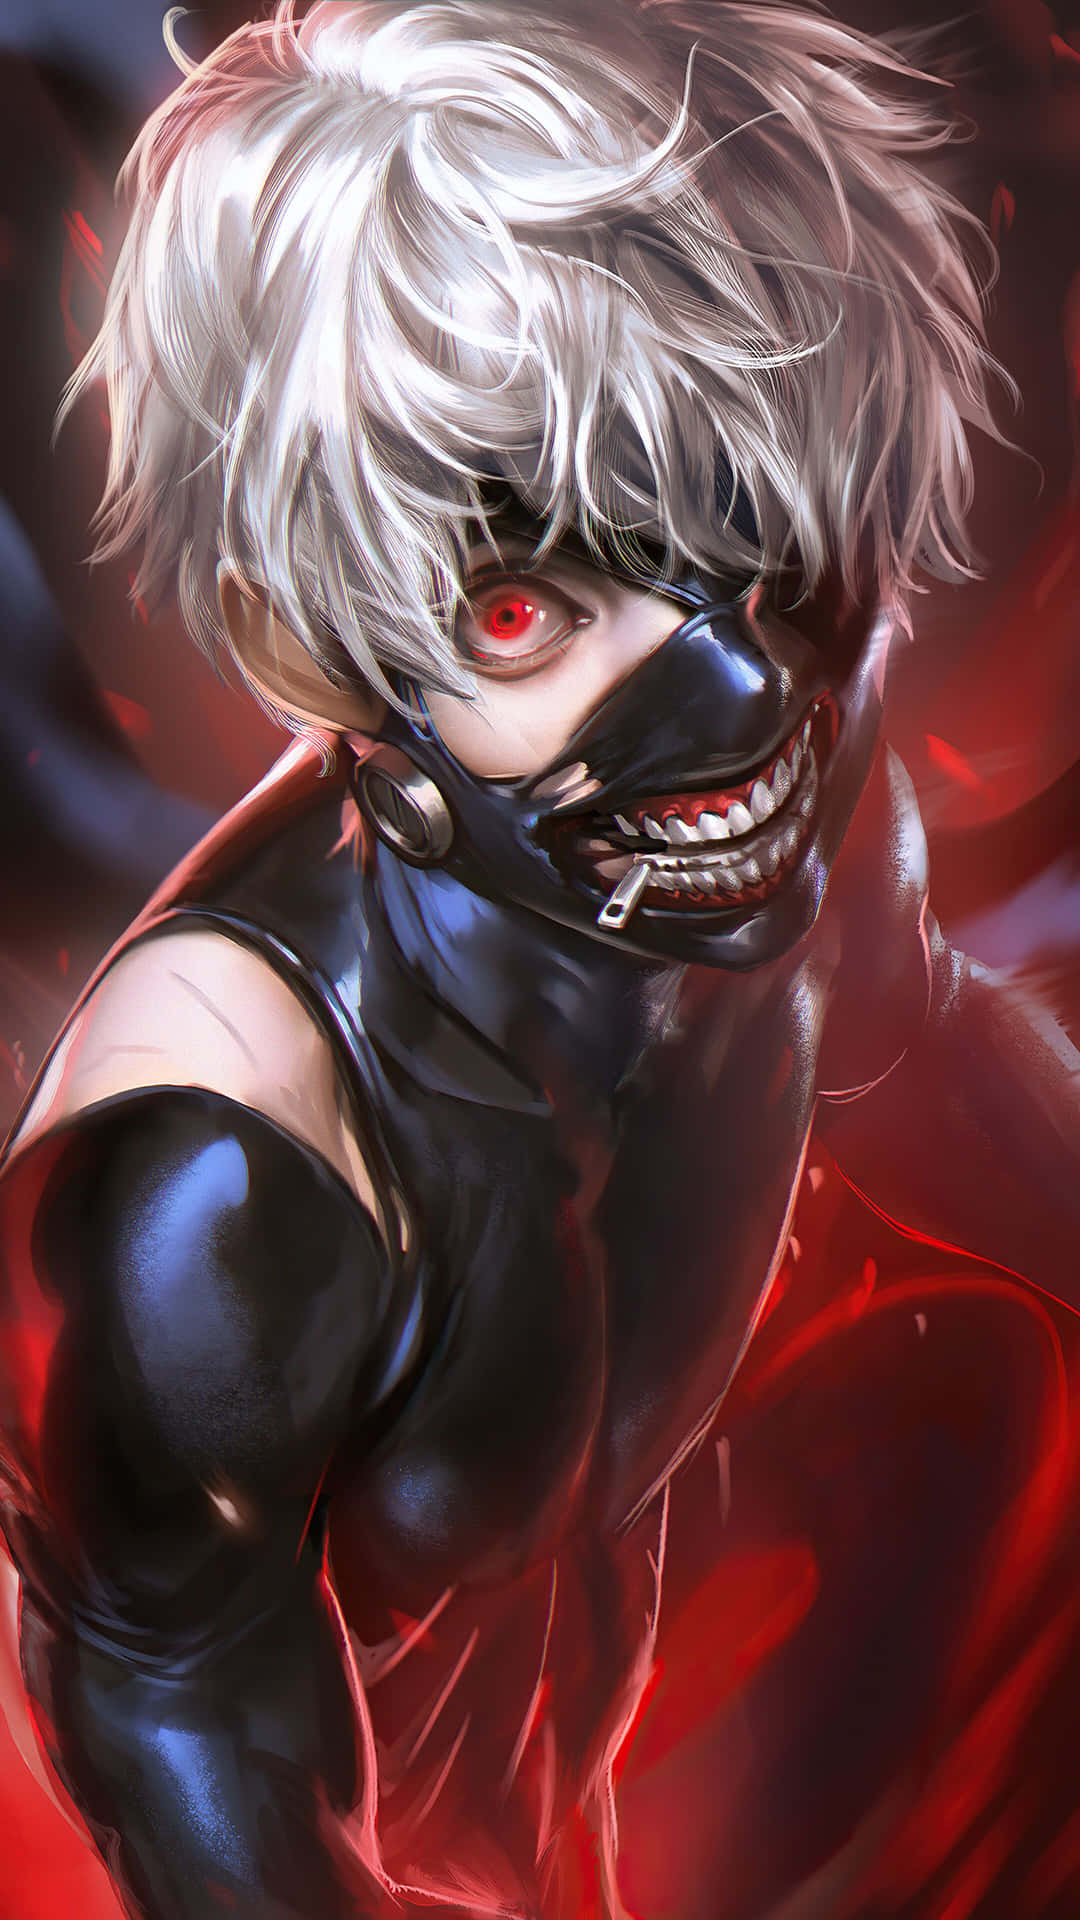 Stay connected with the Kaneki Phone Wallpaper